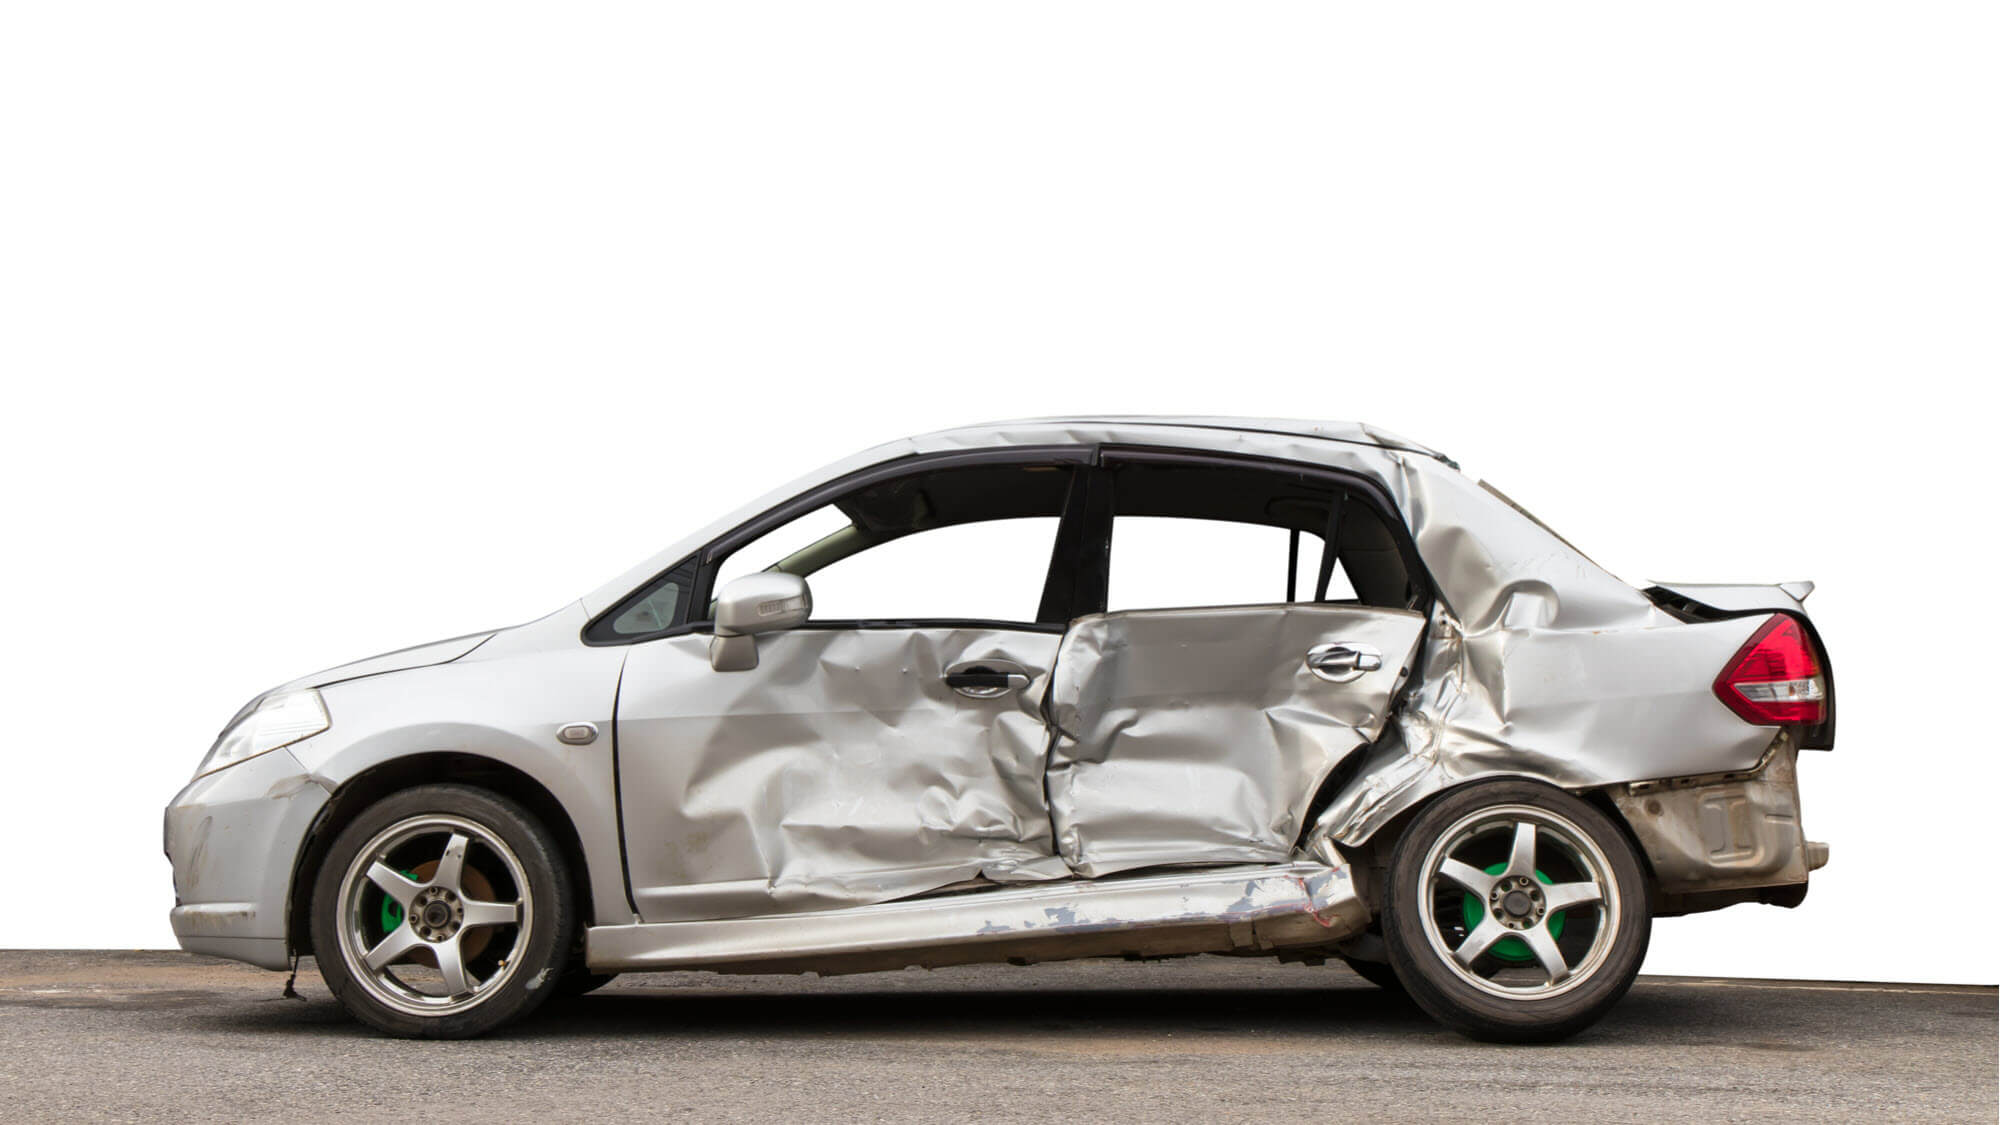 Auto Accidents: Sideswipe Collisions